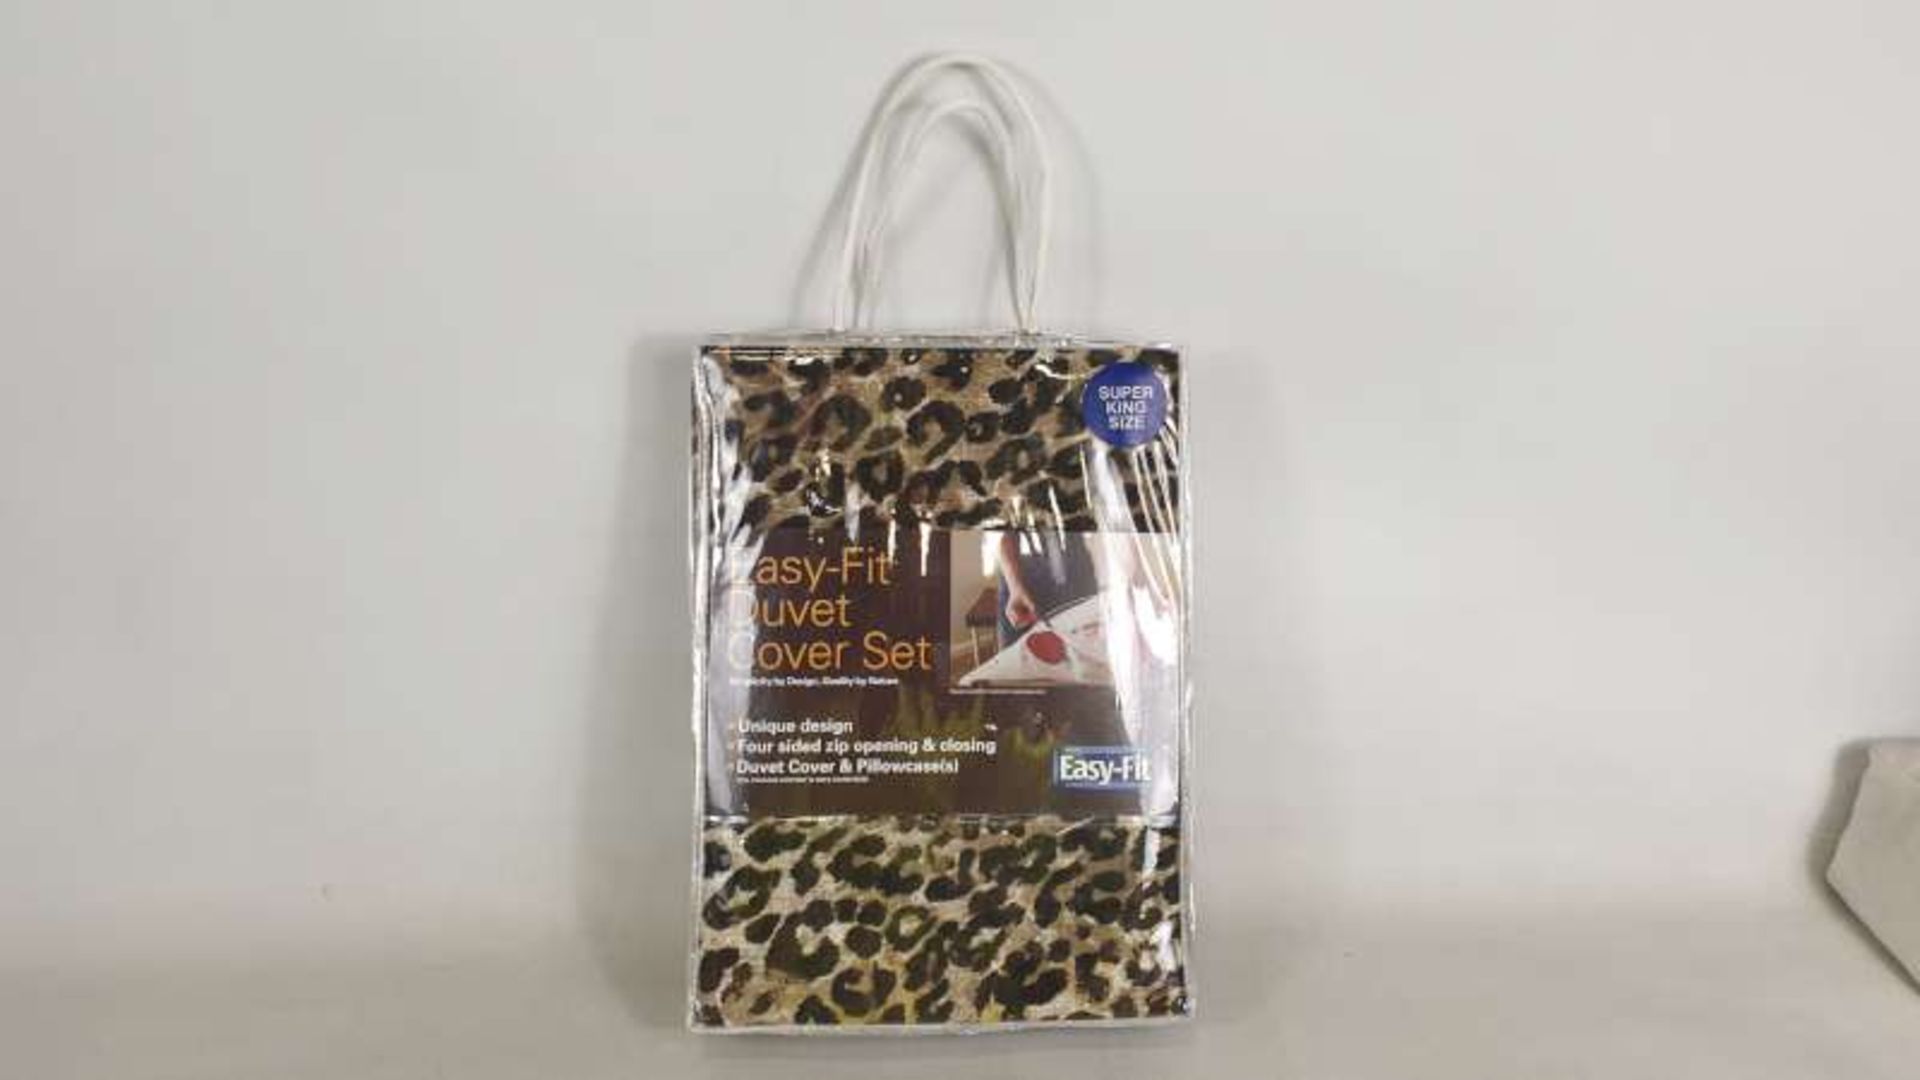 6 X BRAND NEW EASY-FIT SUPERKING SIZE ANIMAL 1 P1 DUVET + 2 PILLOWCASES RRP £73.65 PER PIECE